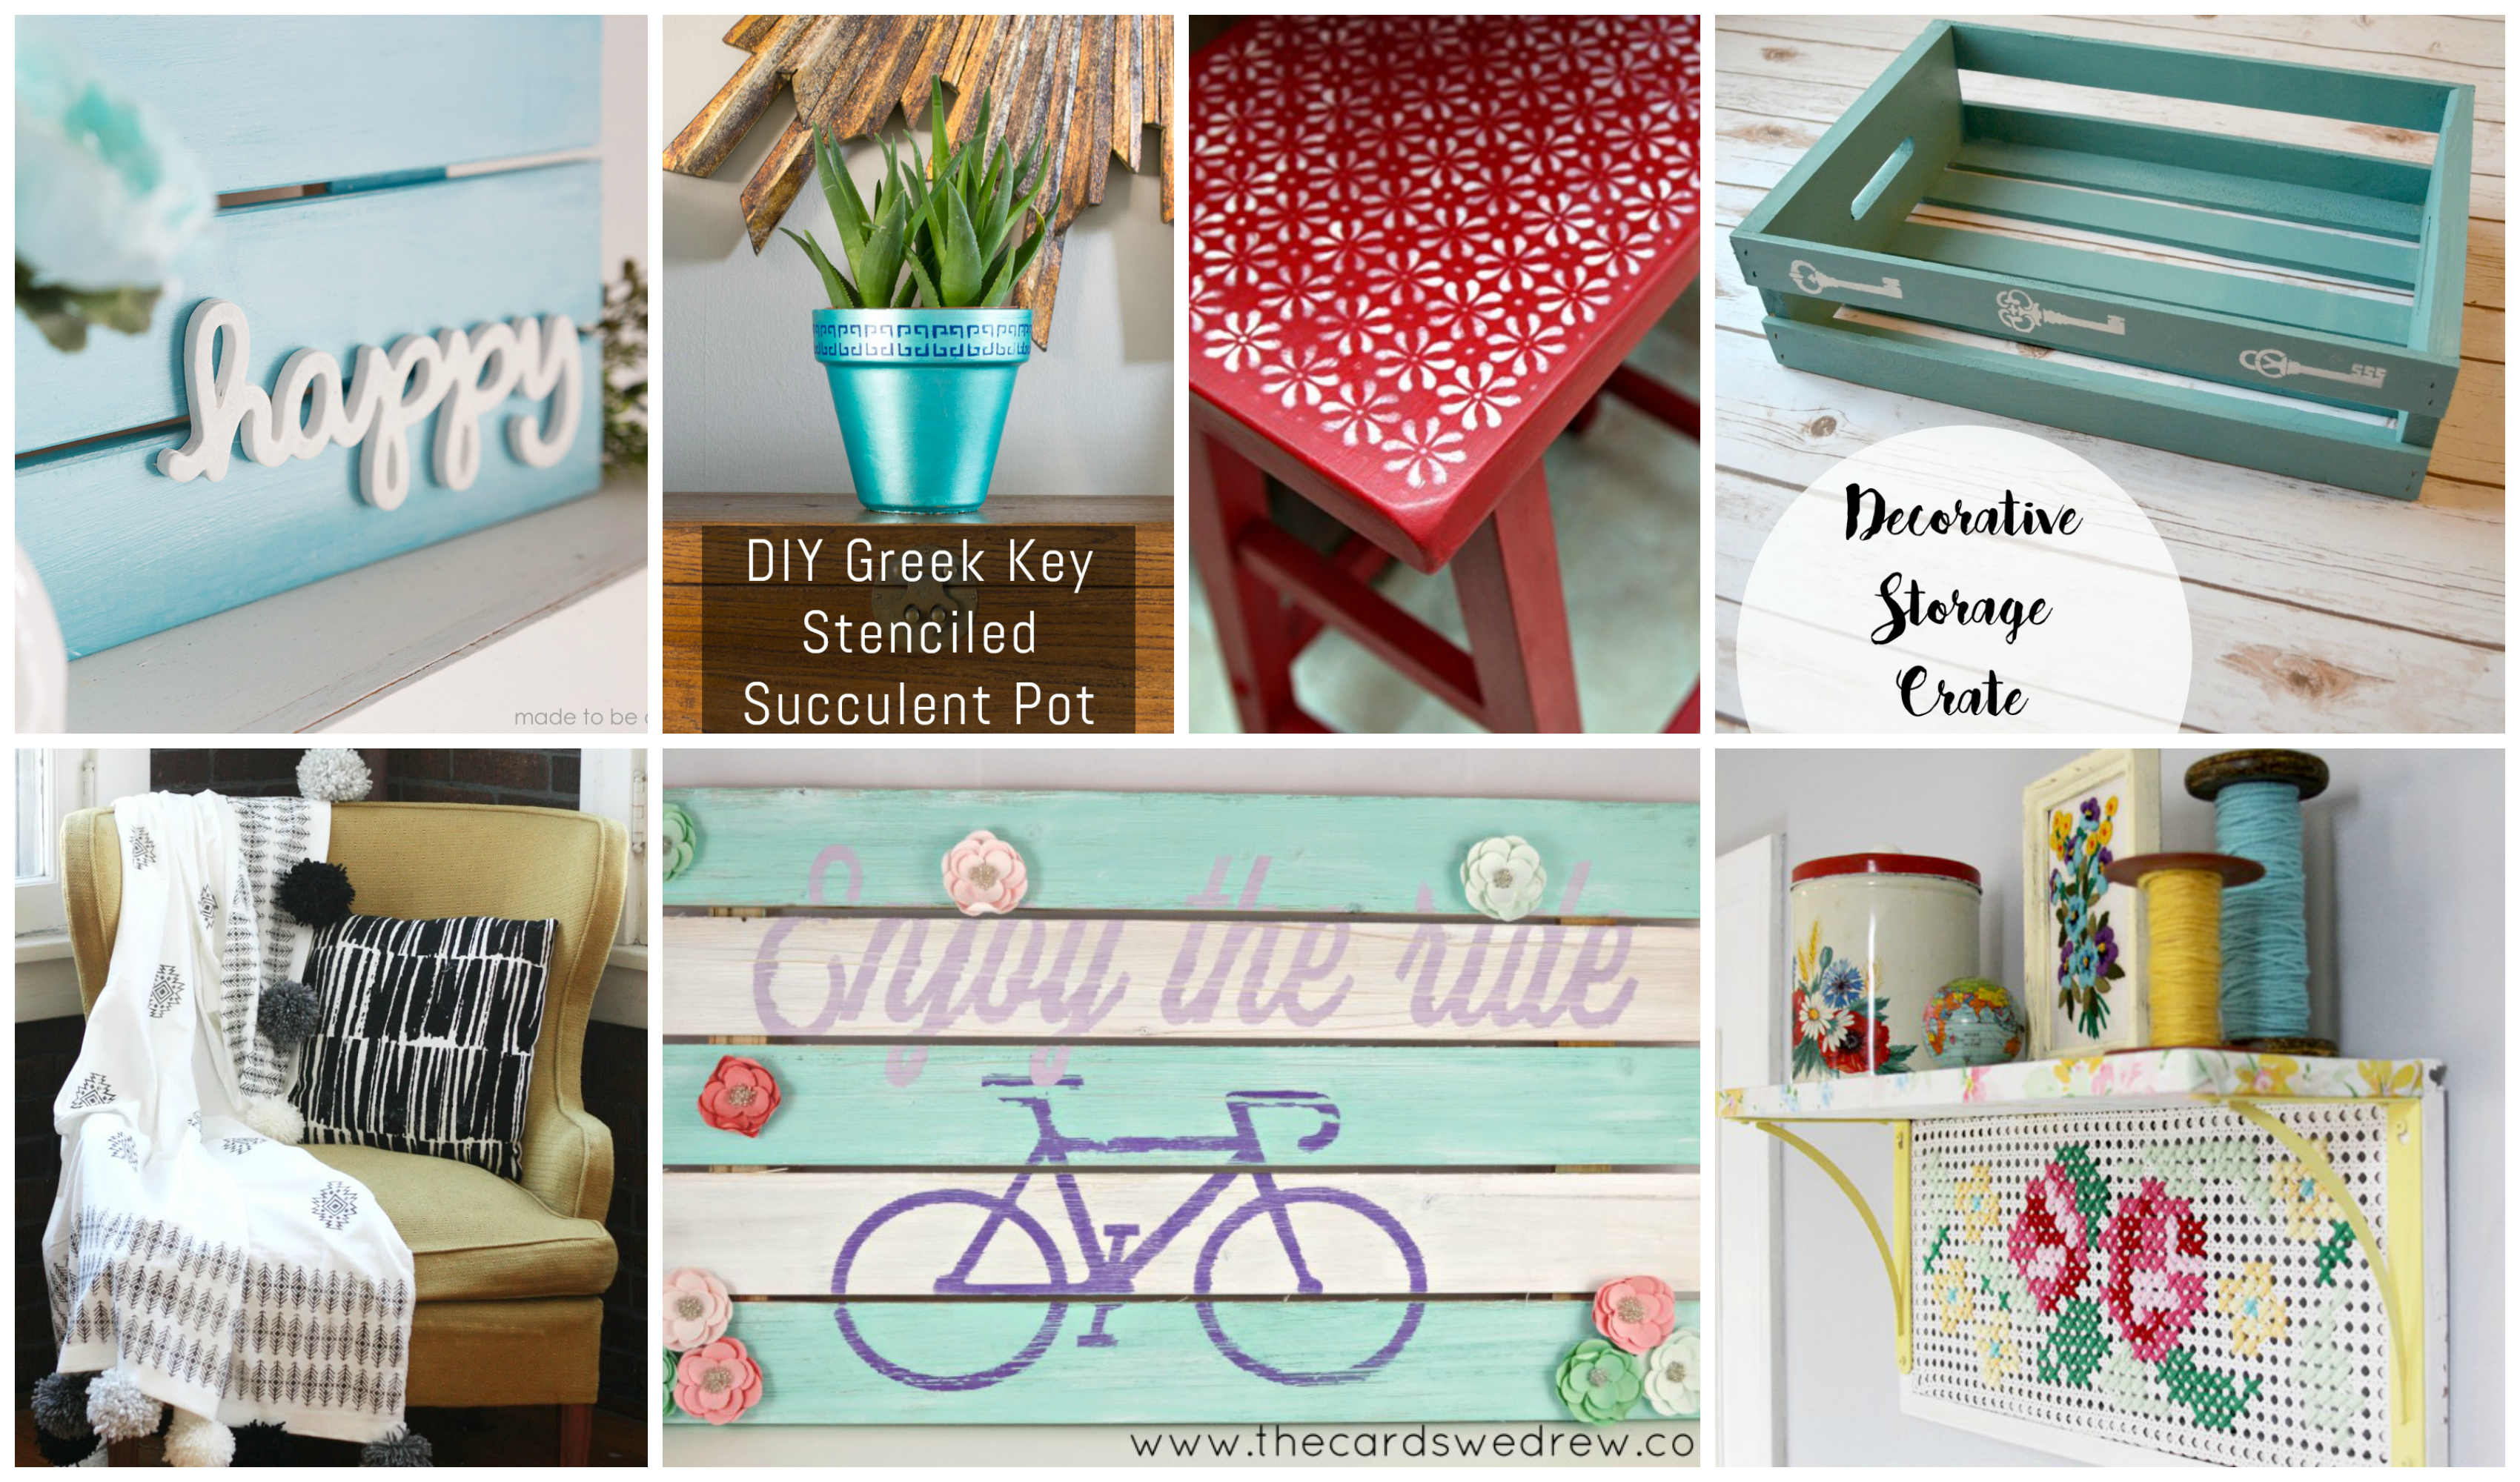 Plaid Creators February Round Up: 10 Beautiful DIY Projects Inspired by 2016 Craft Trends